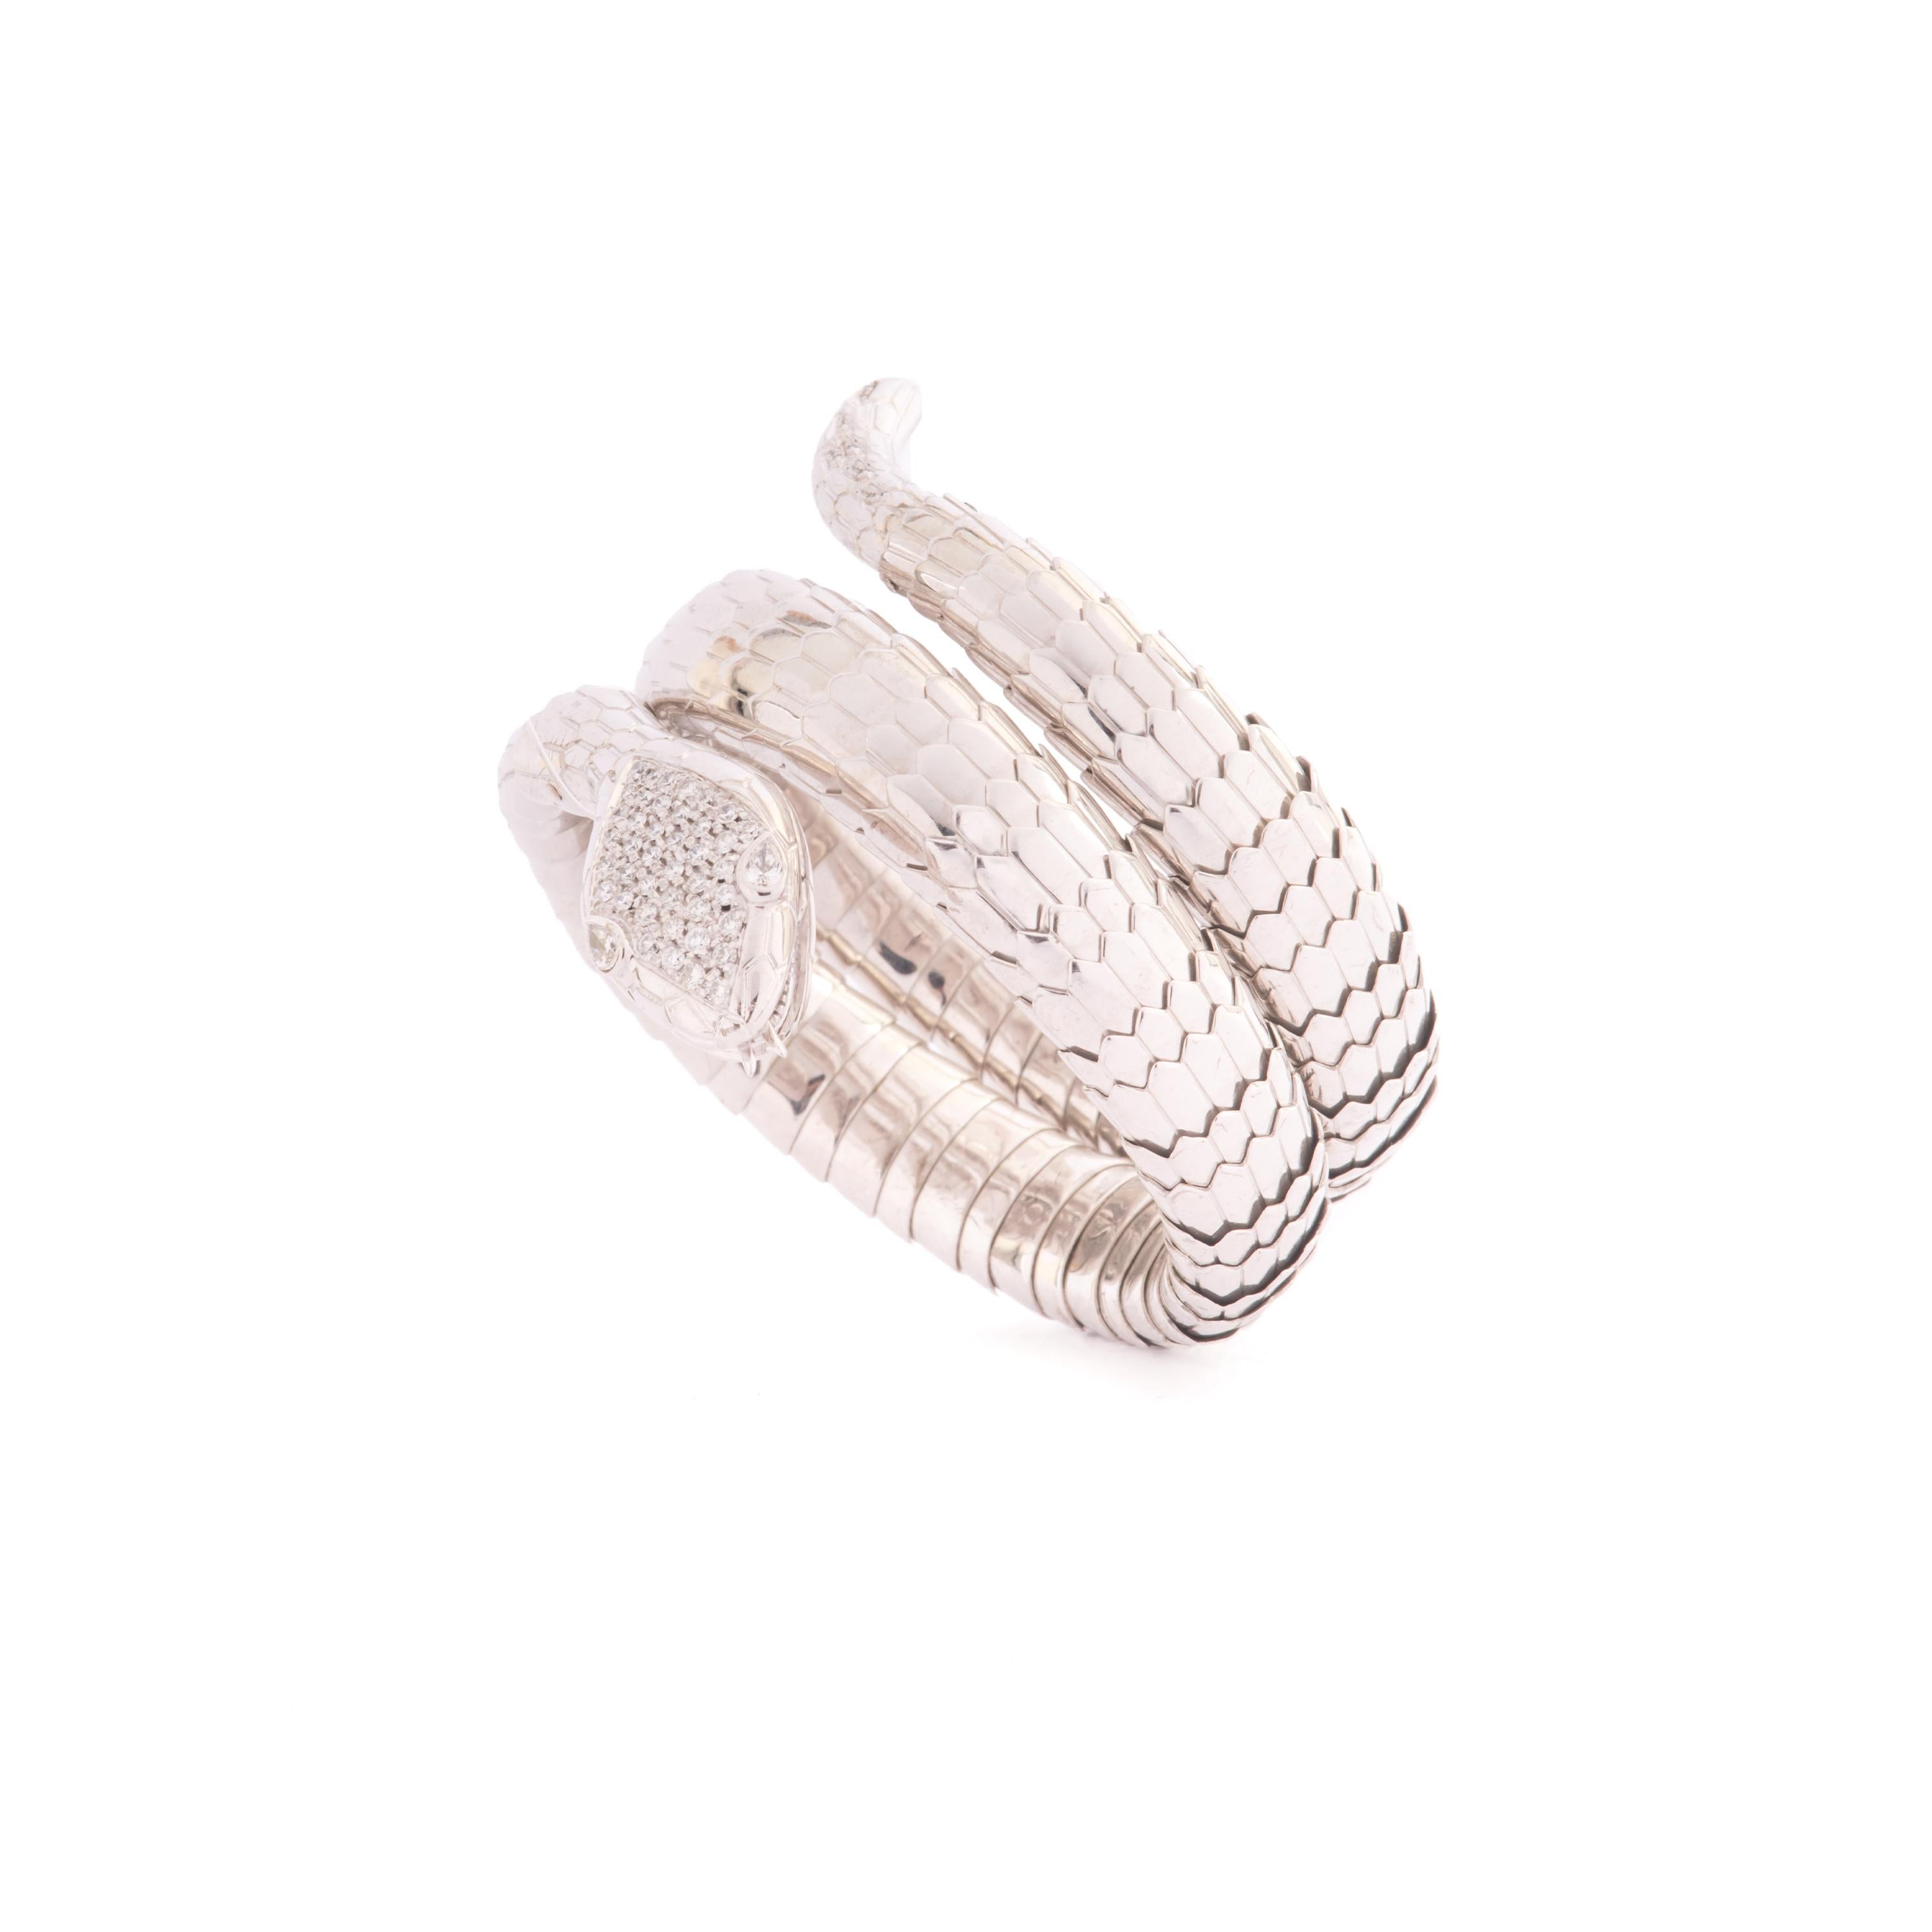 This Stylish extendable Illario white silver  and Diamonds Bracelet wraps around the wrist twice  
The Bracelet is excepionally crafted in 925 silver  with pavé Diamond on the head ct 0,18 and on the tail and Brilliant Navette-cut eyes ct. 0,77
 The